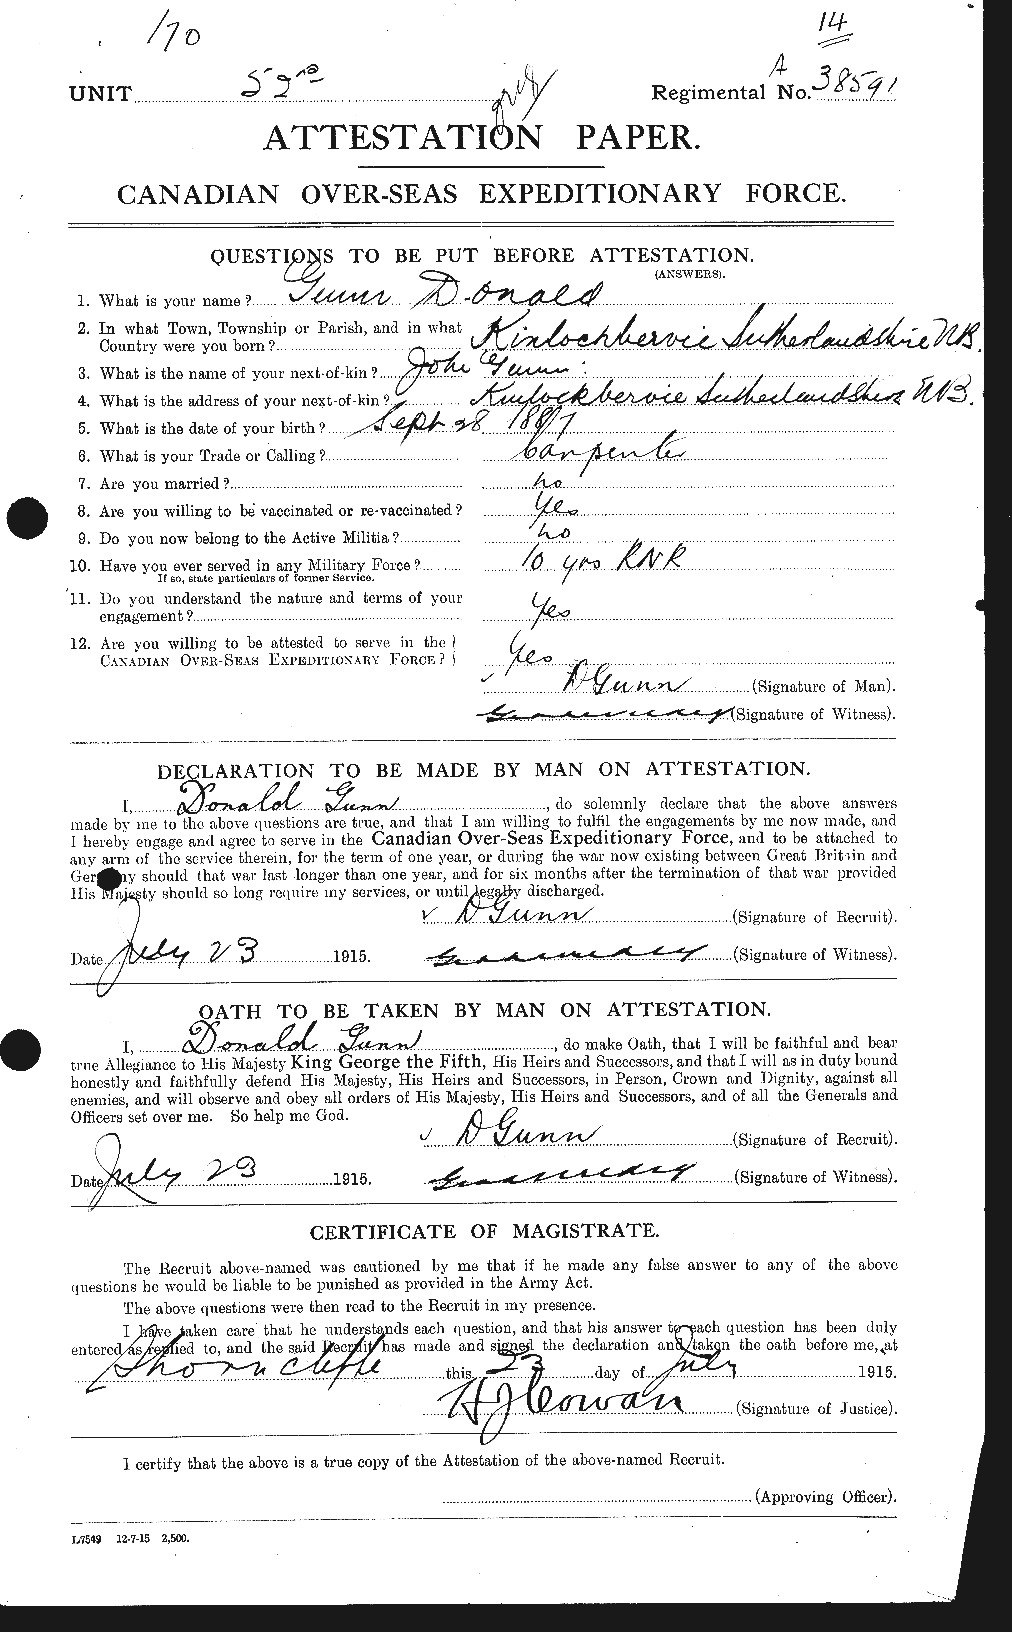 Personnel Records of the First World War - CEF 368027a